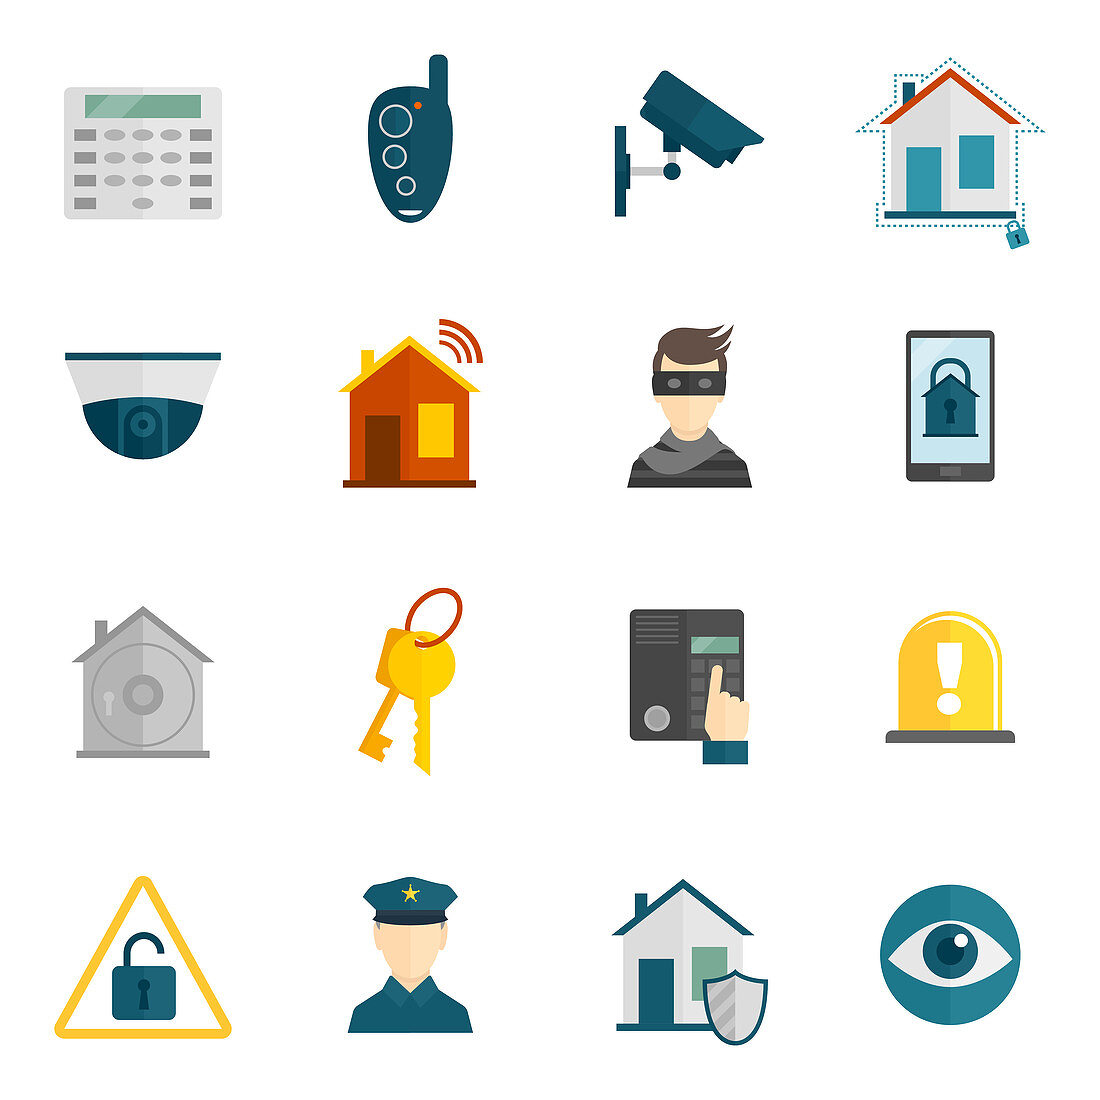 Home security icons, illustration